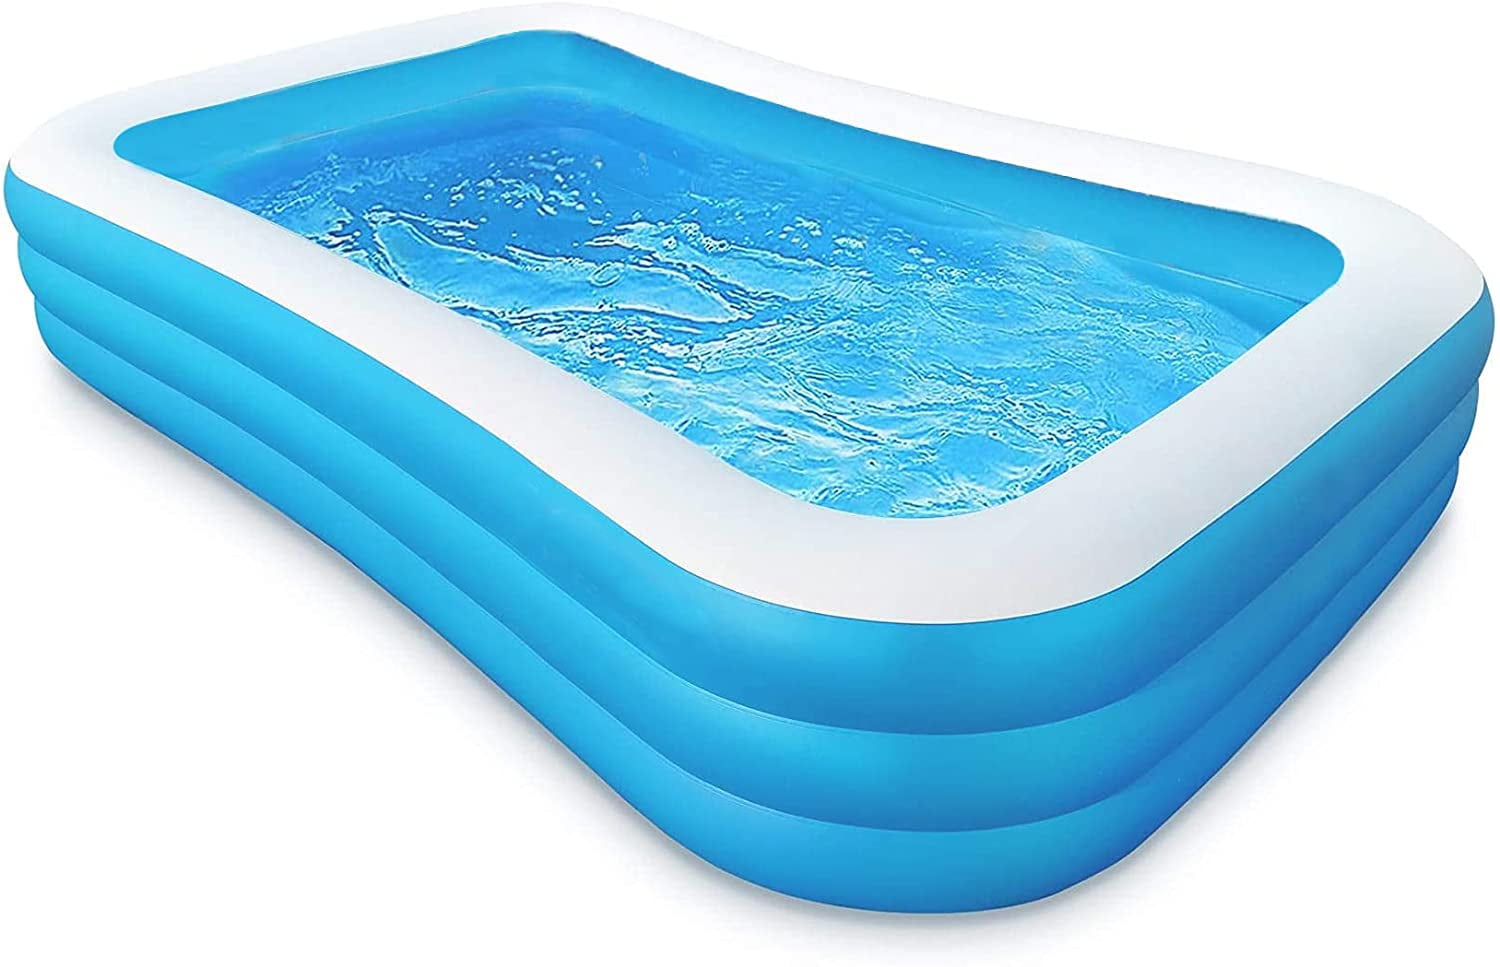 120" x 72" x 22" NEW! Inflatable 10' Foot Rectangular Family Pool Play Day 